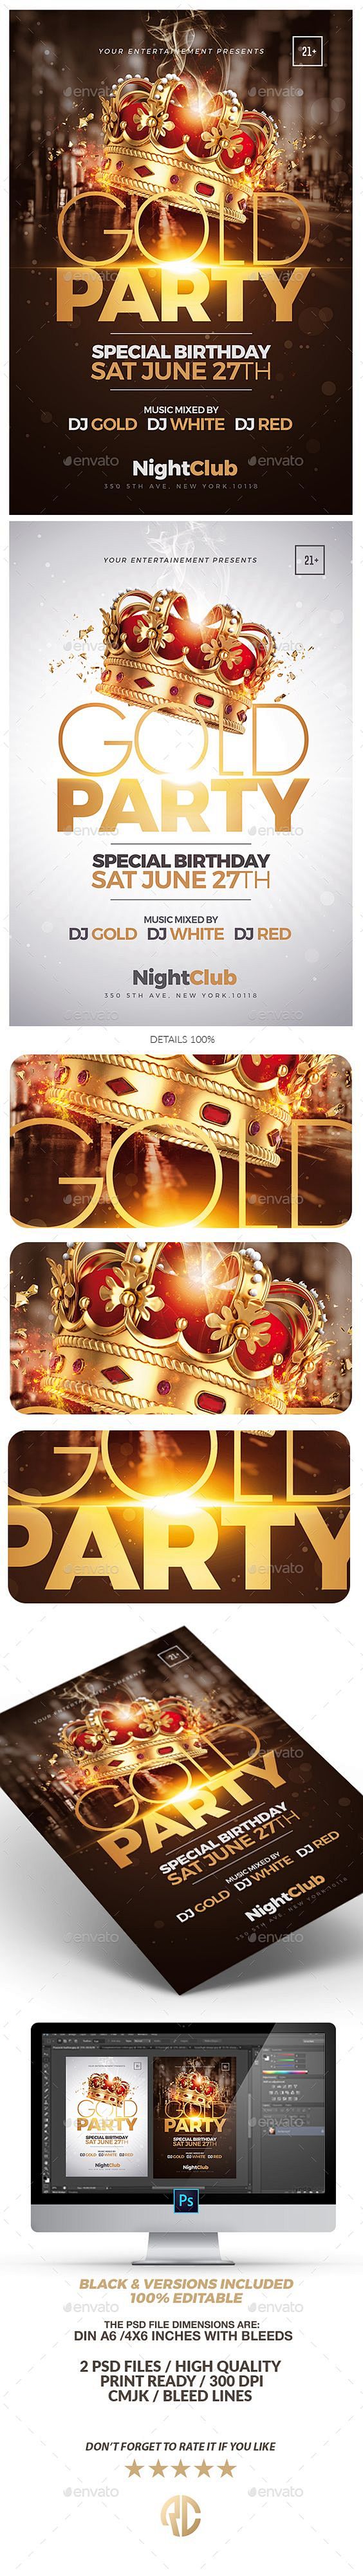 Gold Party Flyer | S...